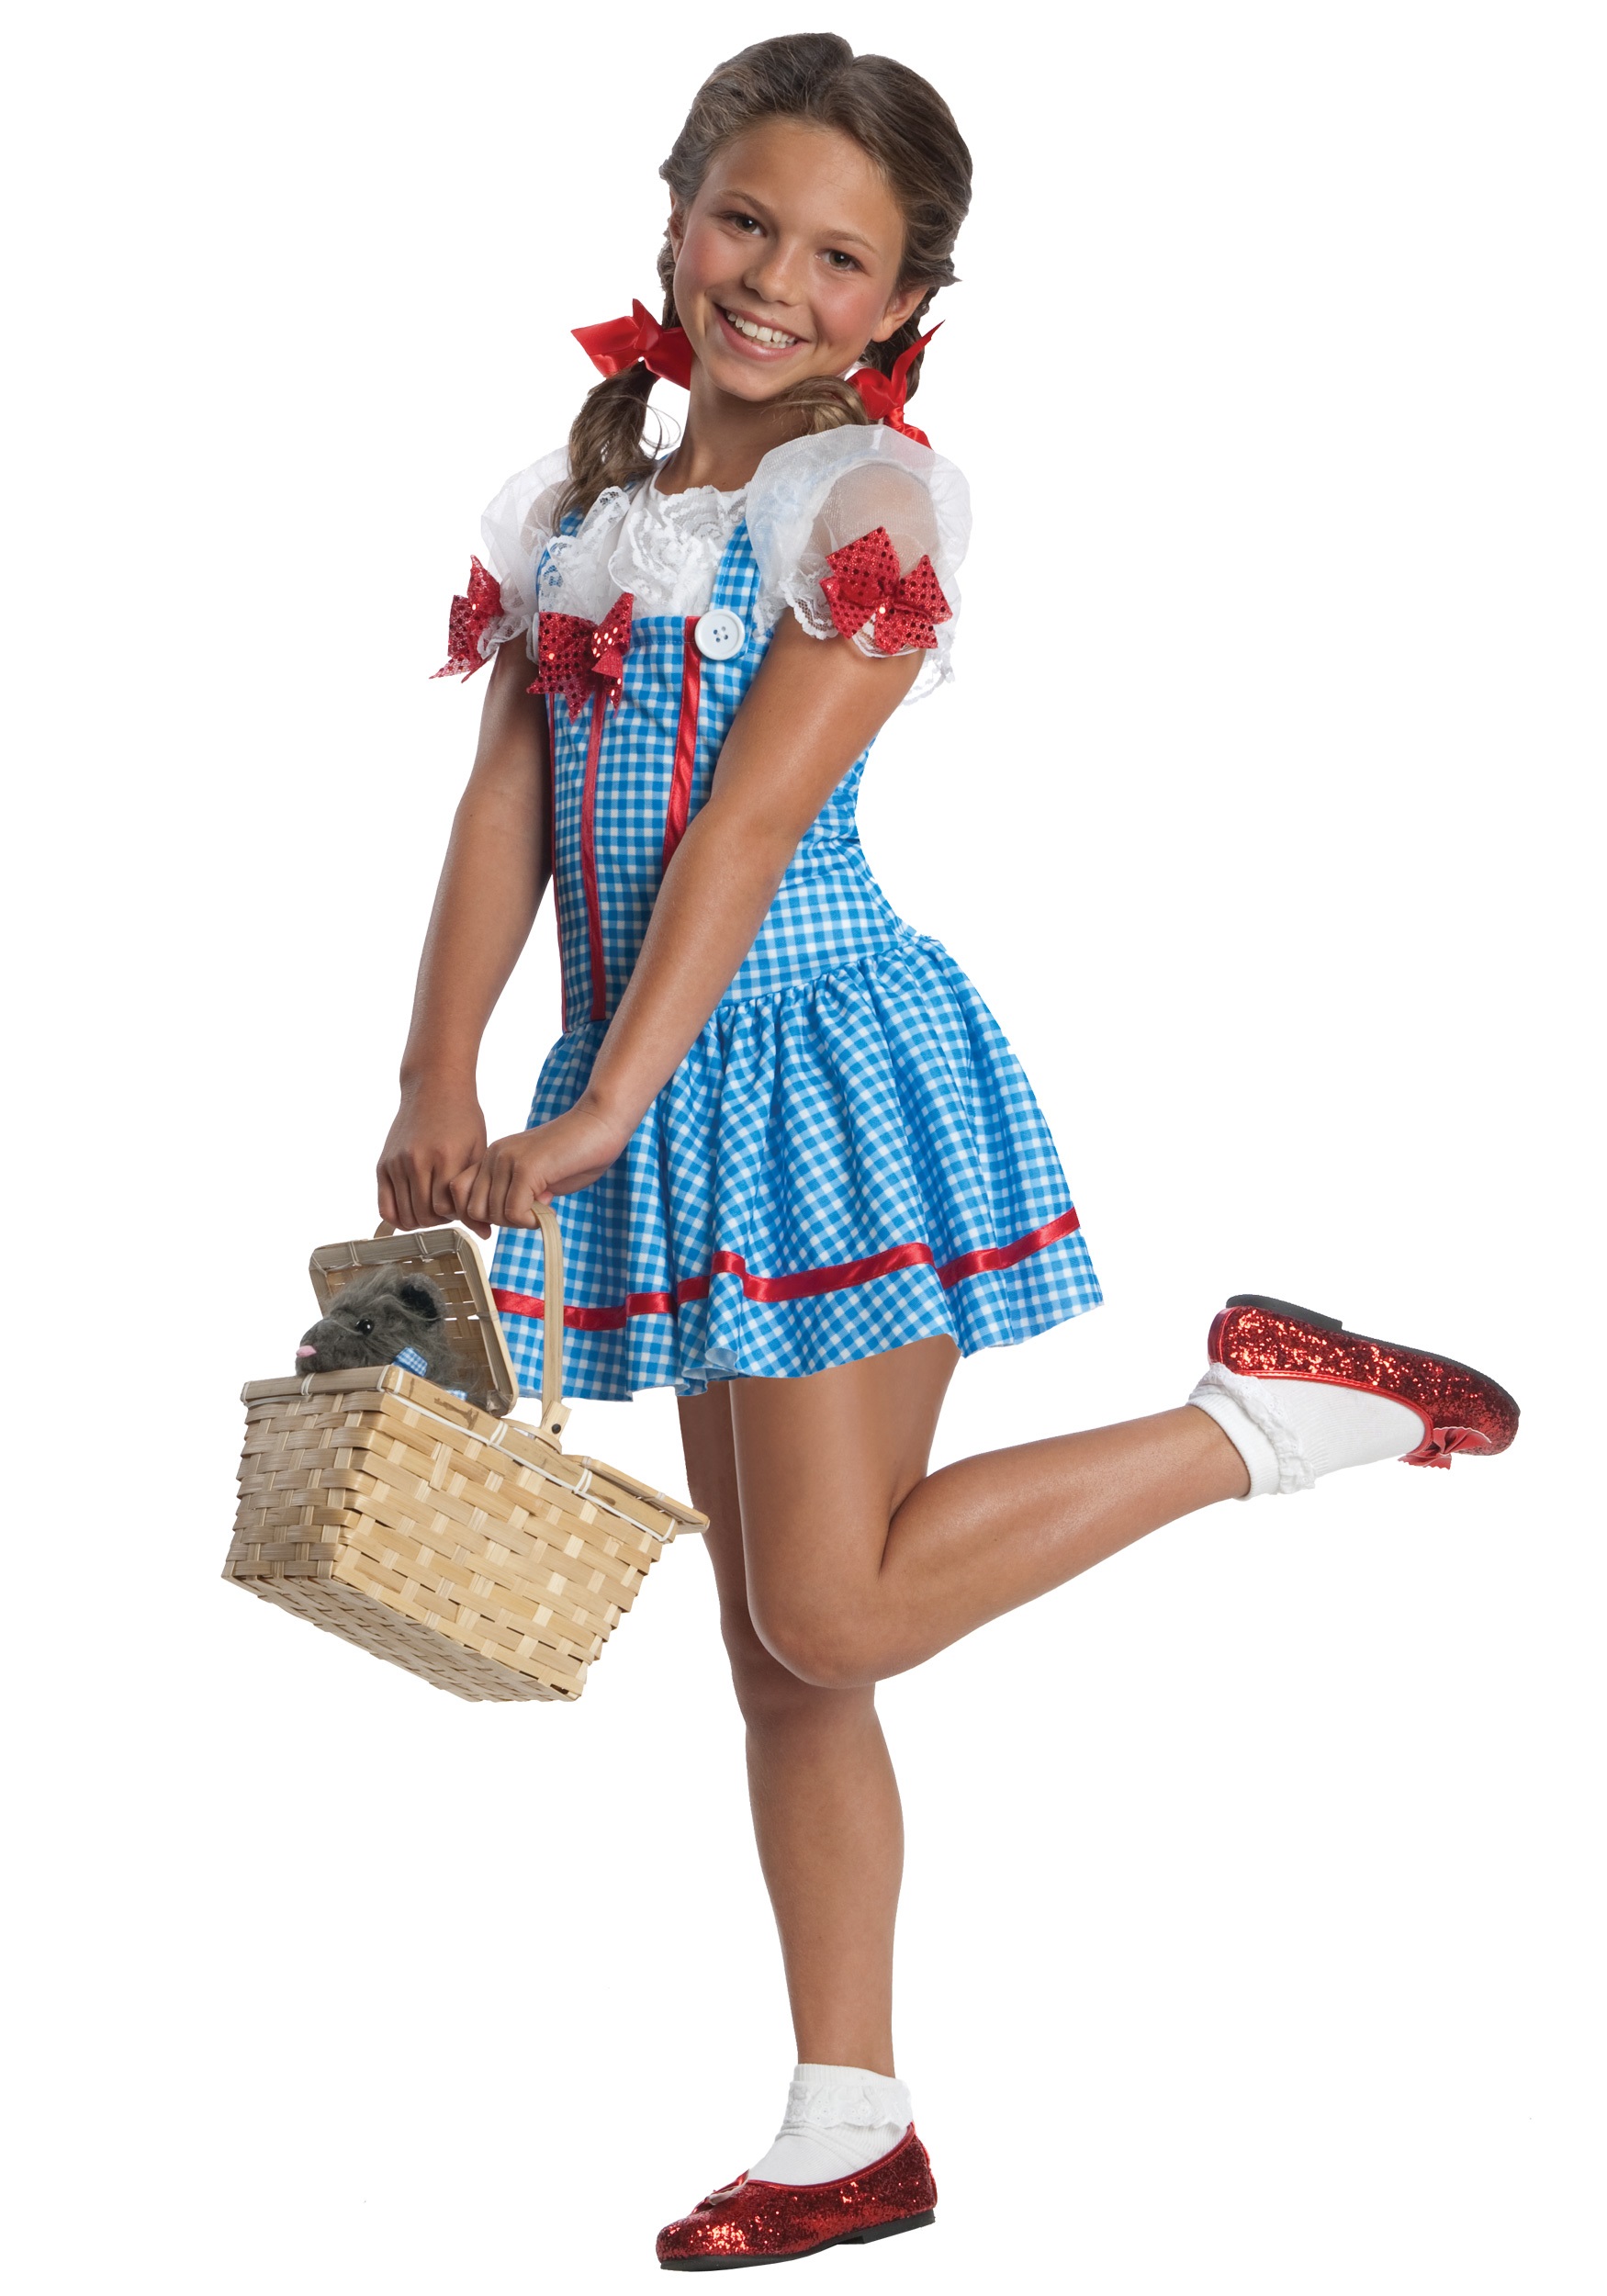 of oz Adult dorothy wizard costume